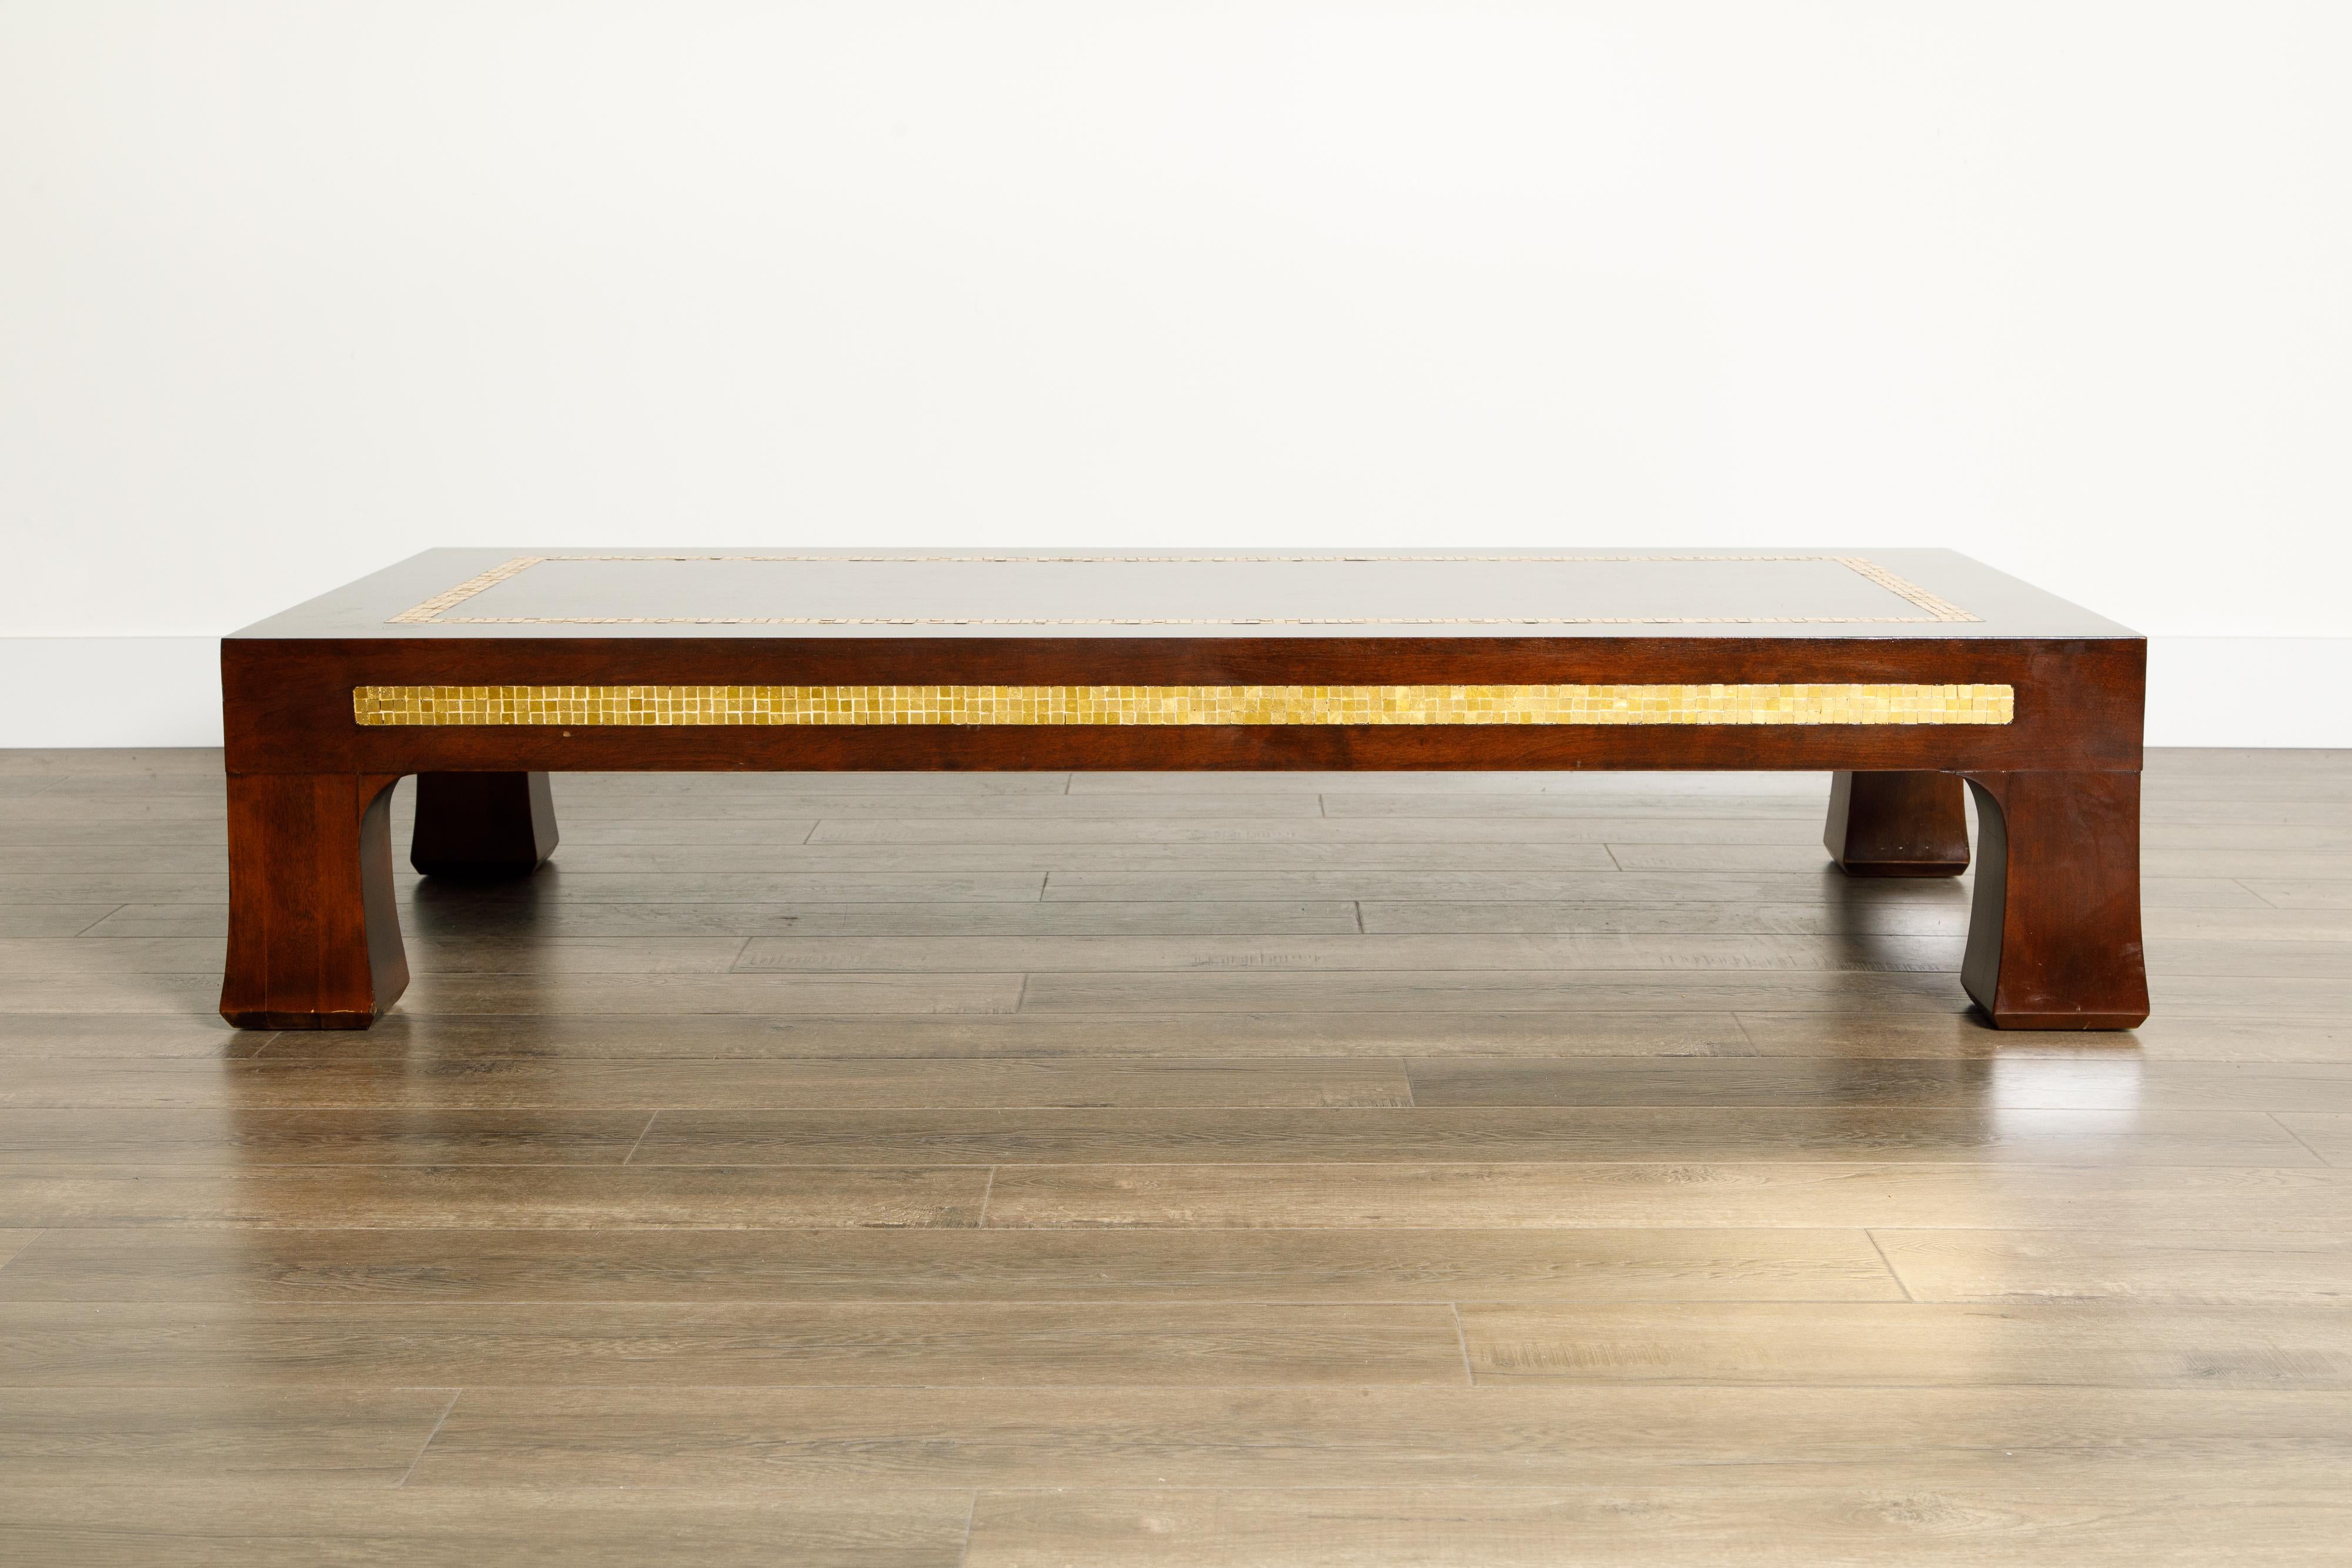 This spectacular deep brown walnut coffee table was designed by Edward Wormley for Dunbar, circa 1950s, and features Mid-Century Modern flared legs and golden mosaic tile inlay wrapping all four sides and on the table top. Signed underneath with the